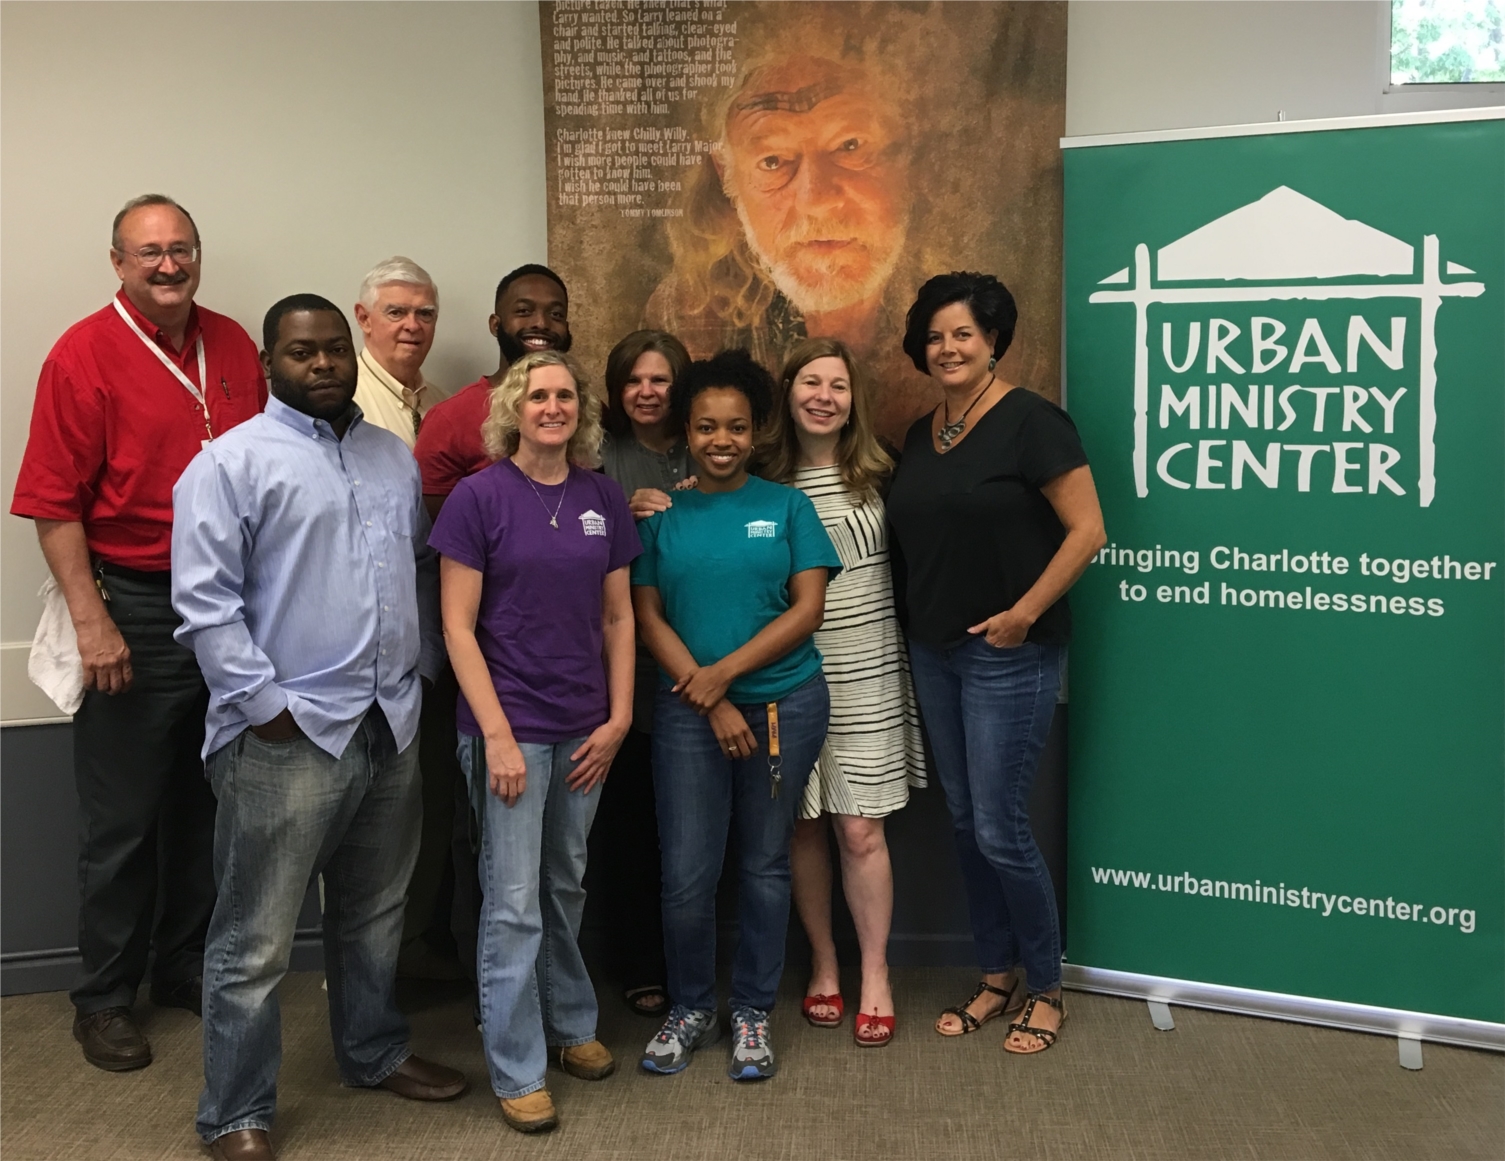 The team on the main campus of Urban Ministry Center provides basic services to over 400 homeless and at-risk neighbors each day.